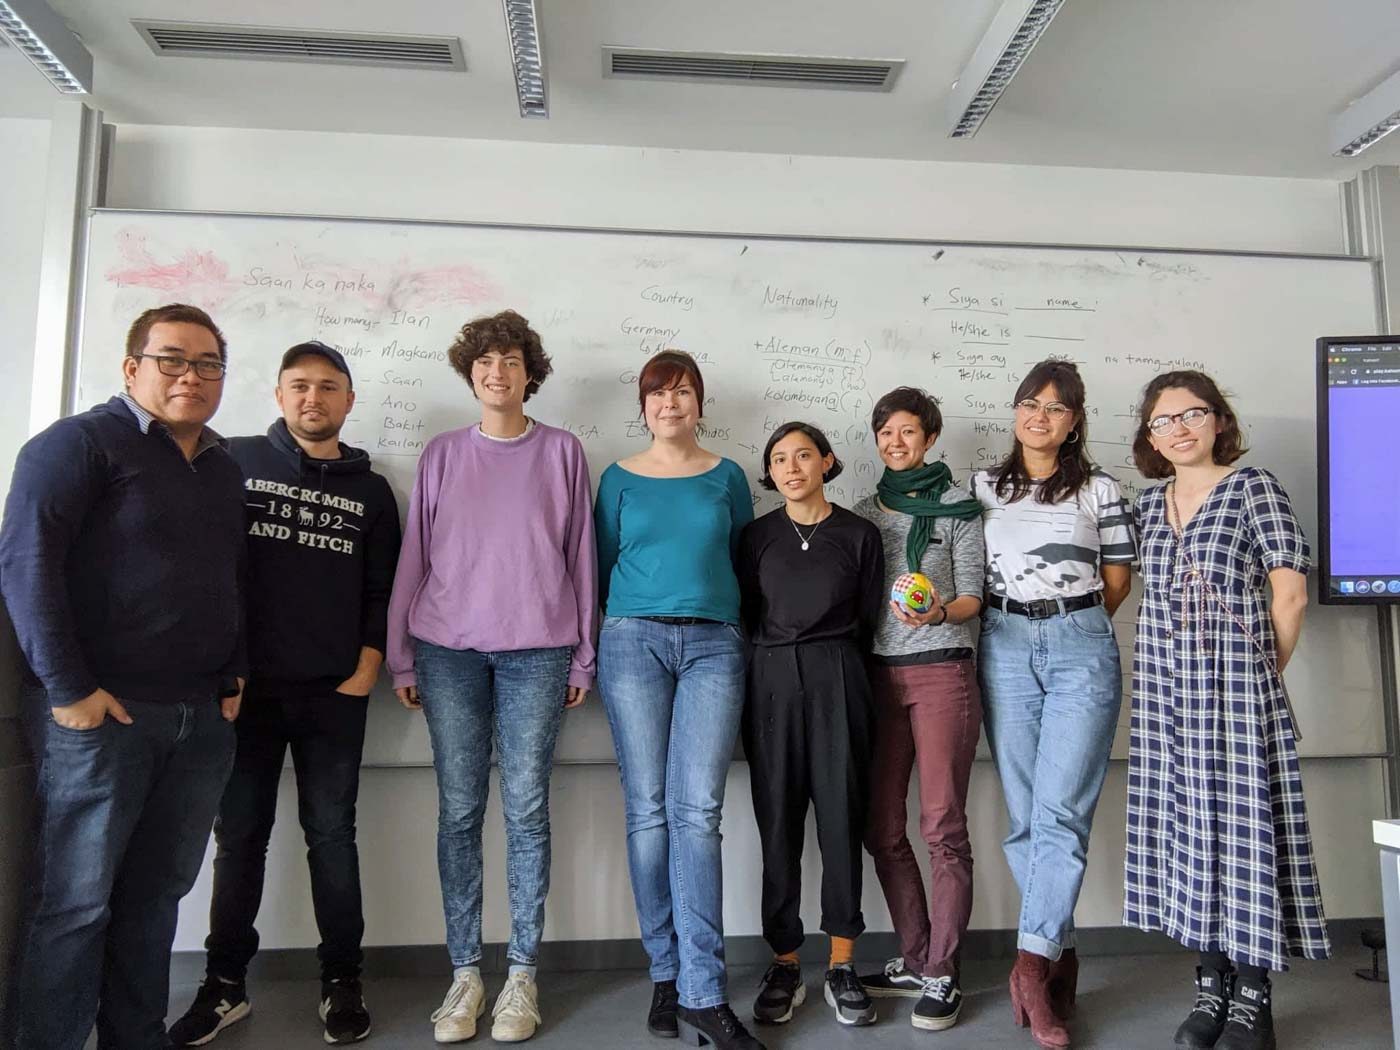 Filipino language and culture making waves in German universities